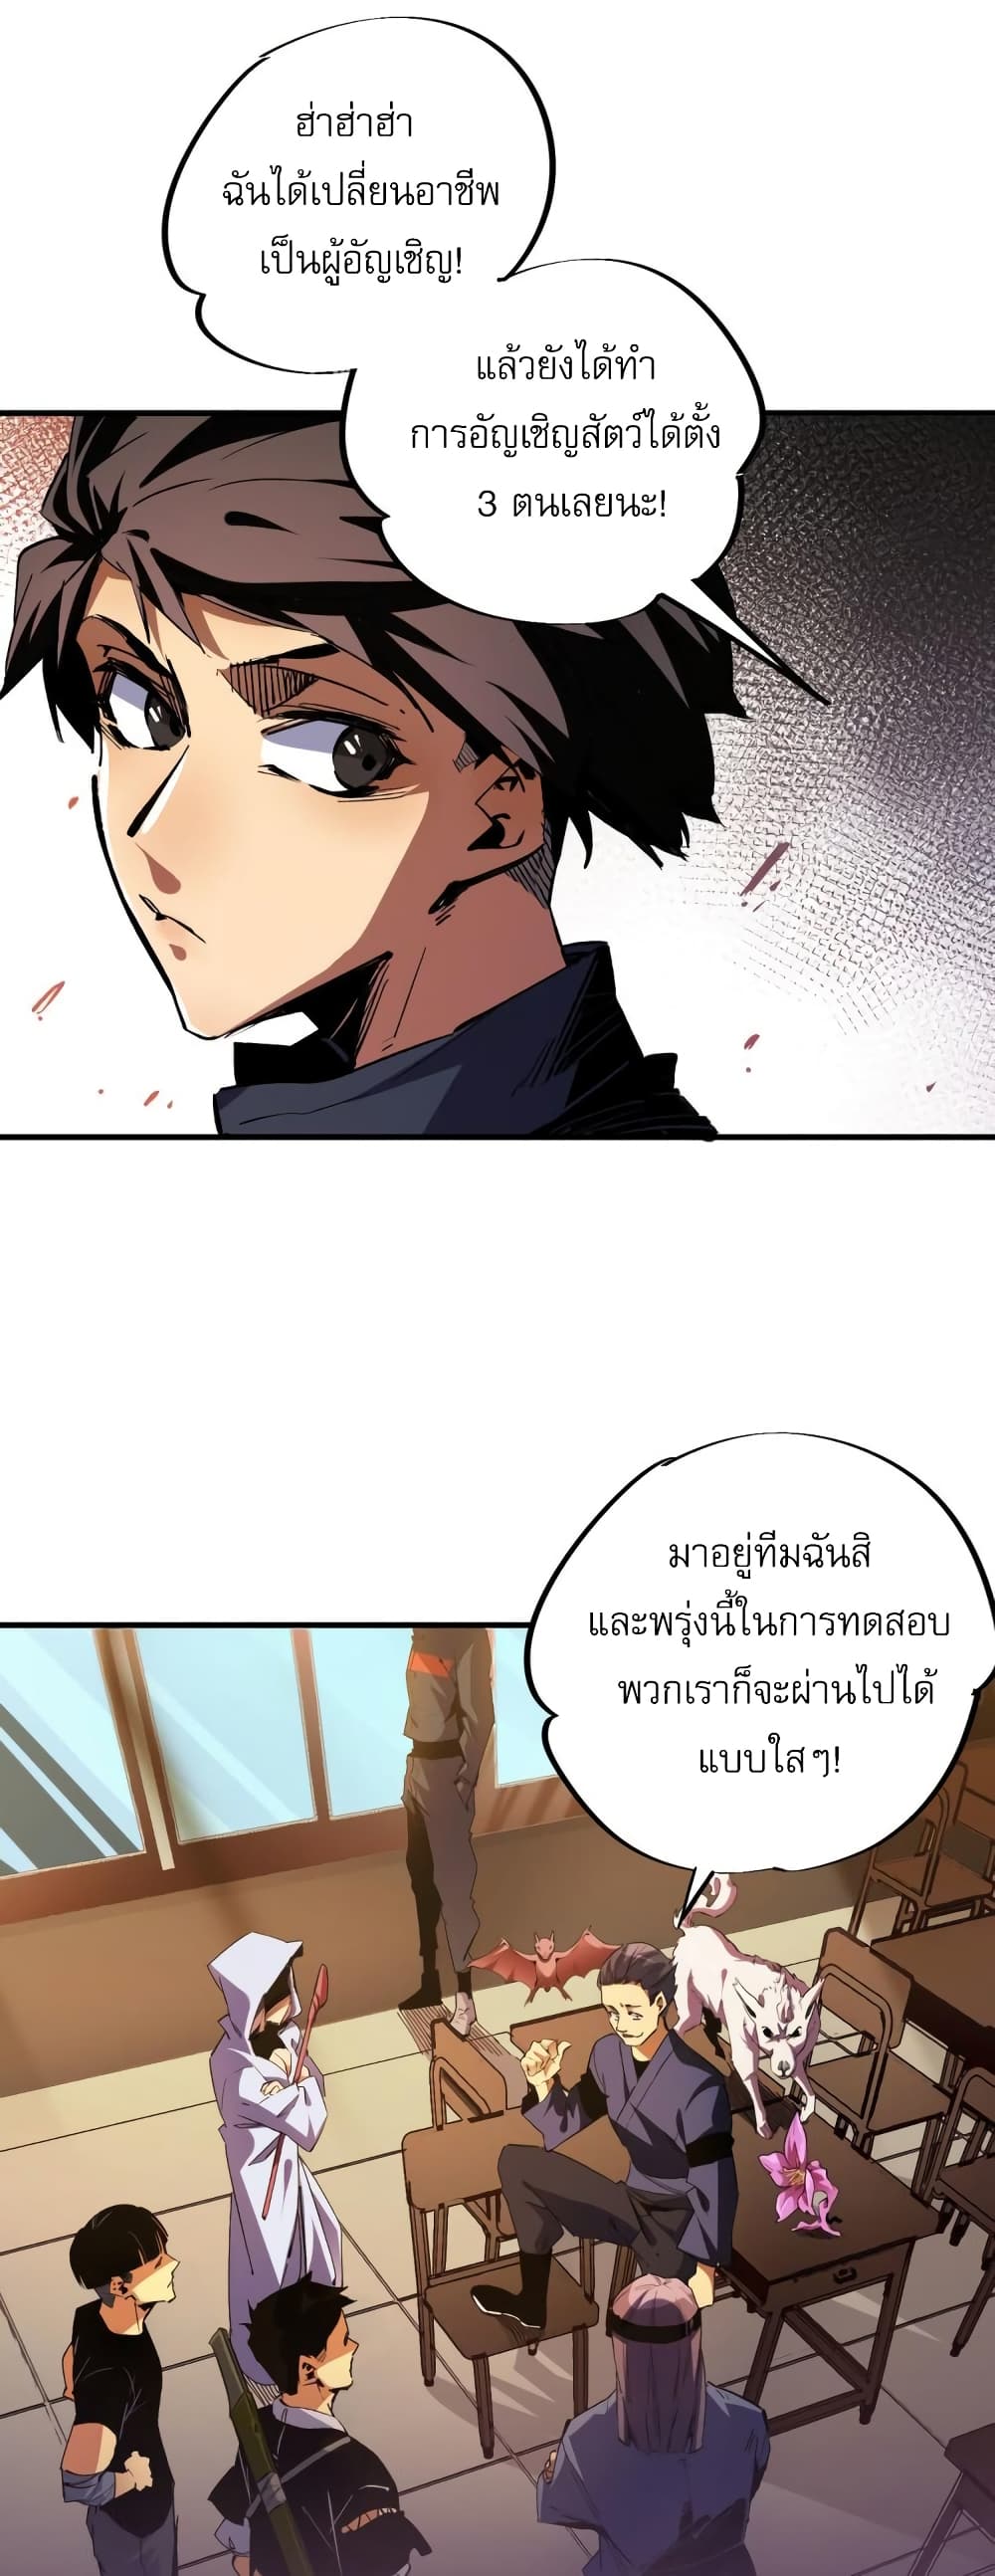 Job Changing for the Entire Population: The Jobless Me Will Terminate the Gods ฉันคือผู้เล่นไร้อาชีพที่สังหารเหล่าเทพ 1-1